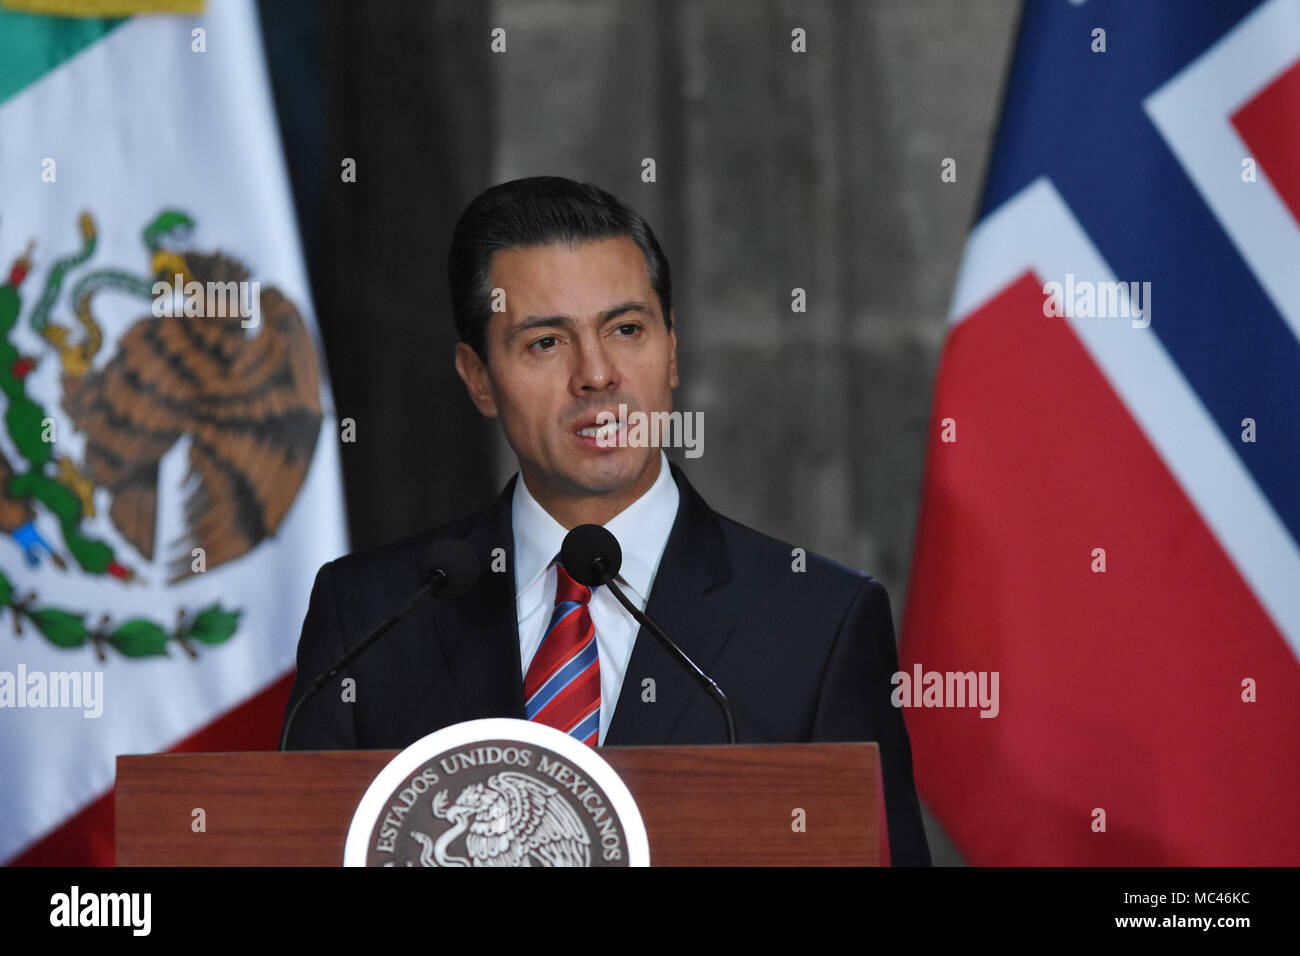 CIDADE DO MÉXICO, DF - 12.04.2018: VISITA OFICIAL DO PRIMEIRO MINISTRO DA NOR - Mexico&#39;s Prent ent Enrique Pena Nieto is speg at a meeting at the Nationtional Palace on April 12, 2018 in Mexico City, Mexico. The reason for the working visit of Erna Solberg is to focus on the theme of Energy (Photo: Carlos Tischler/Fotoarena) Stock Photo